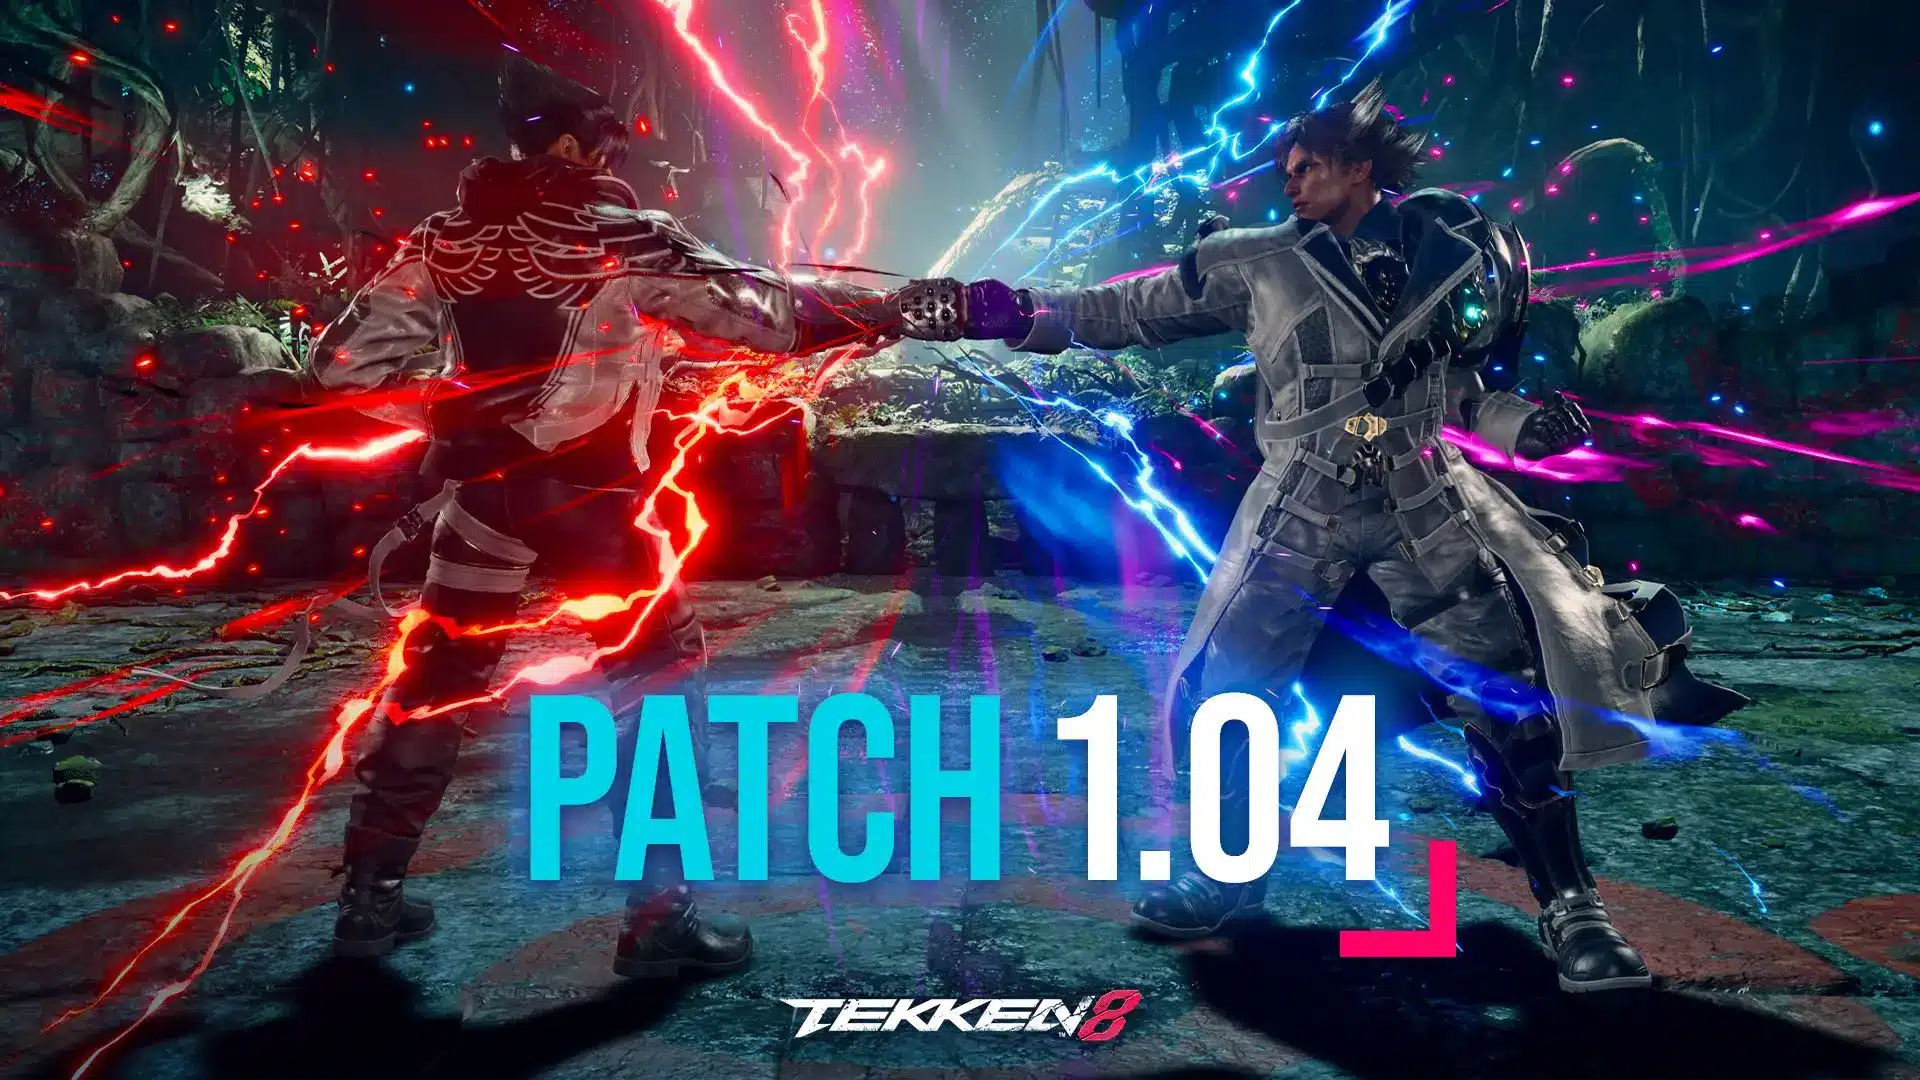 Tekken 8 Update Version 1.04 Patch Notes Revealed, Patch 1.05 Out in June